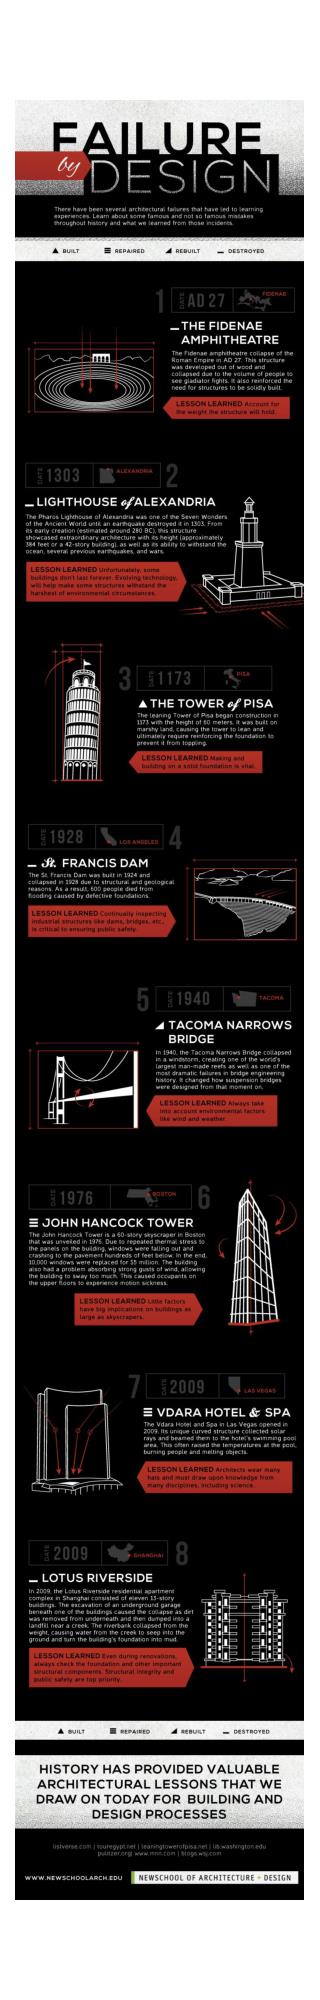 Failure by Design: An infographic about architectural blunders